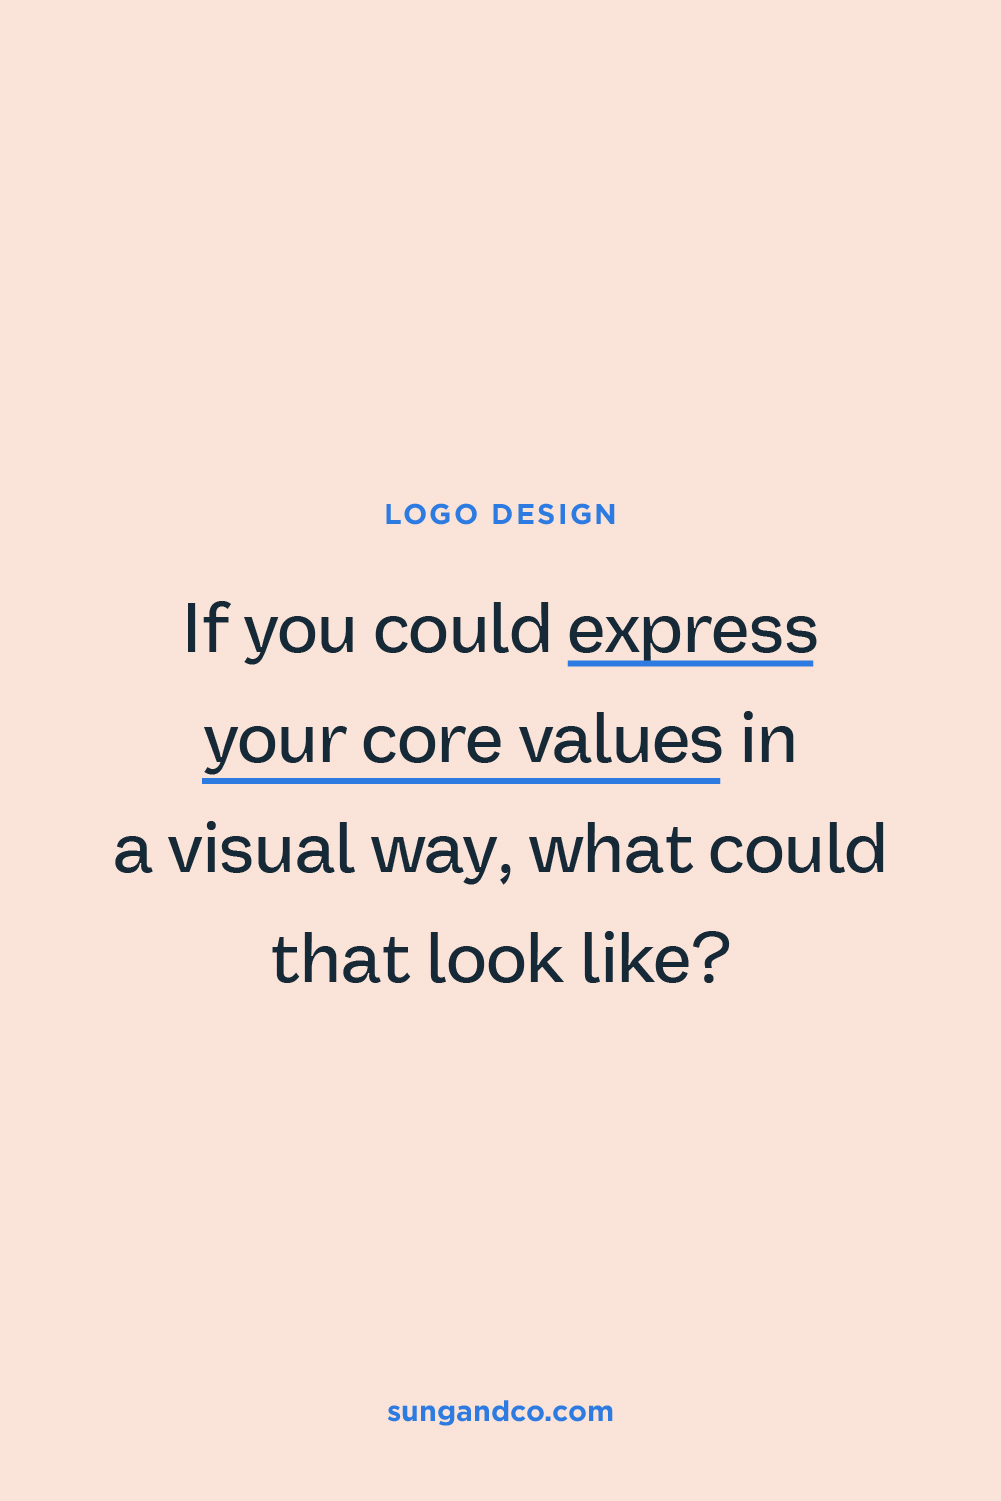 If you could express your core values in a visual way, what could that look like?